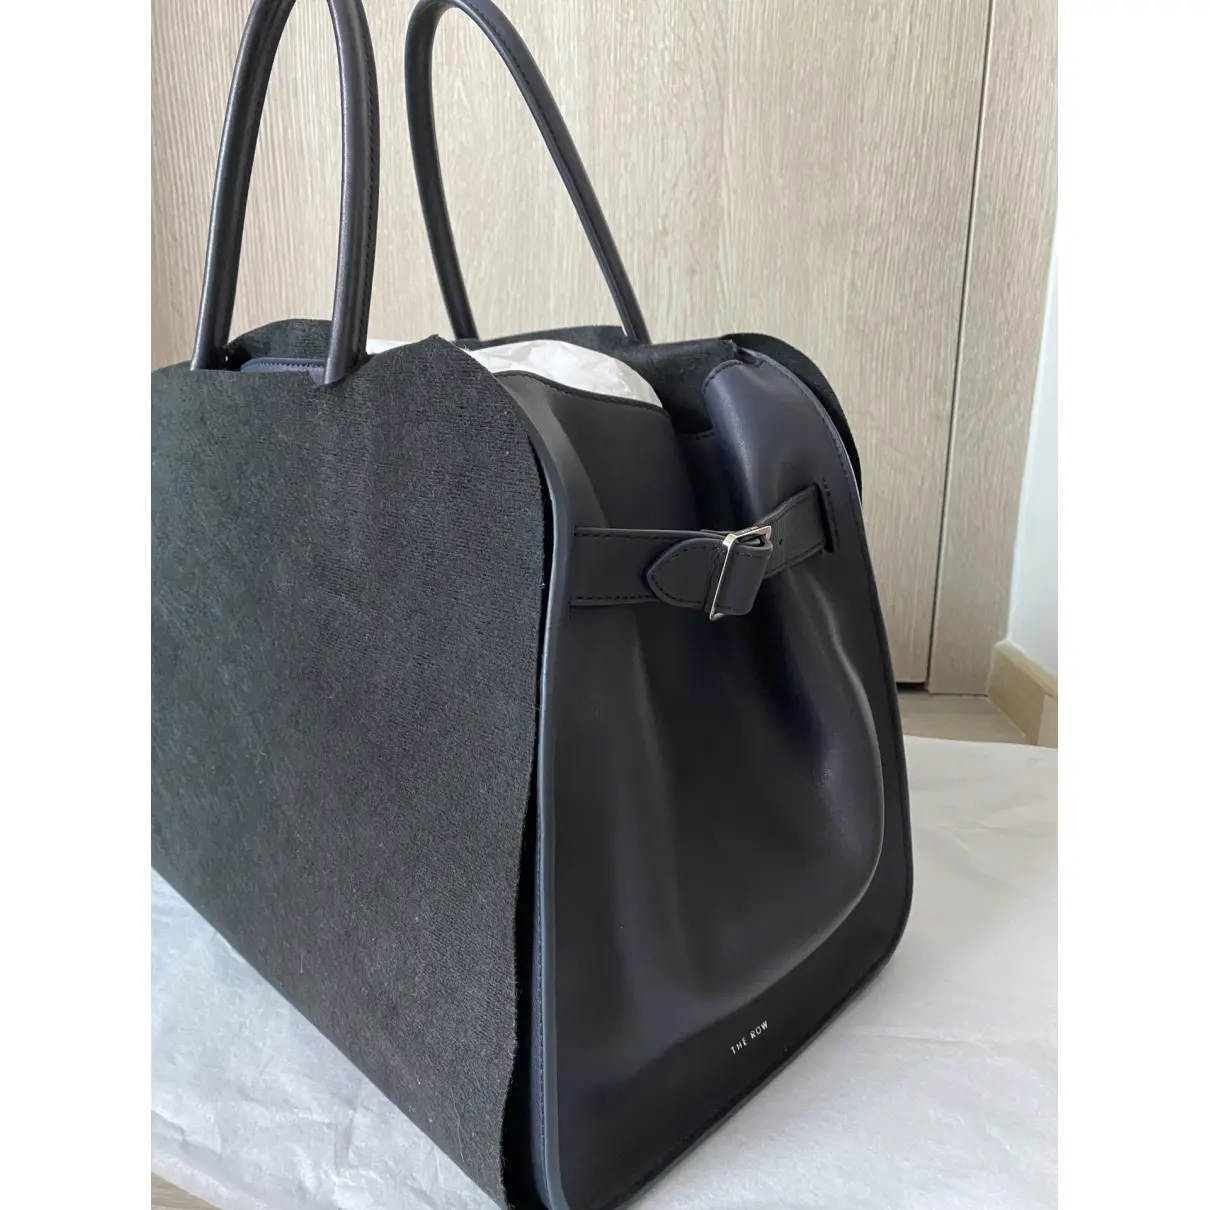 Buy The Row Margaux leather handbag online